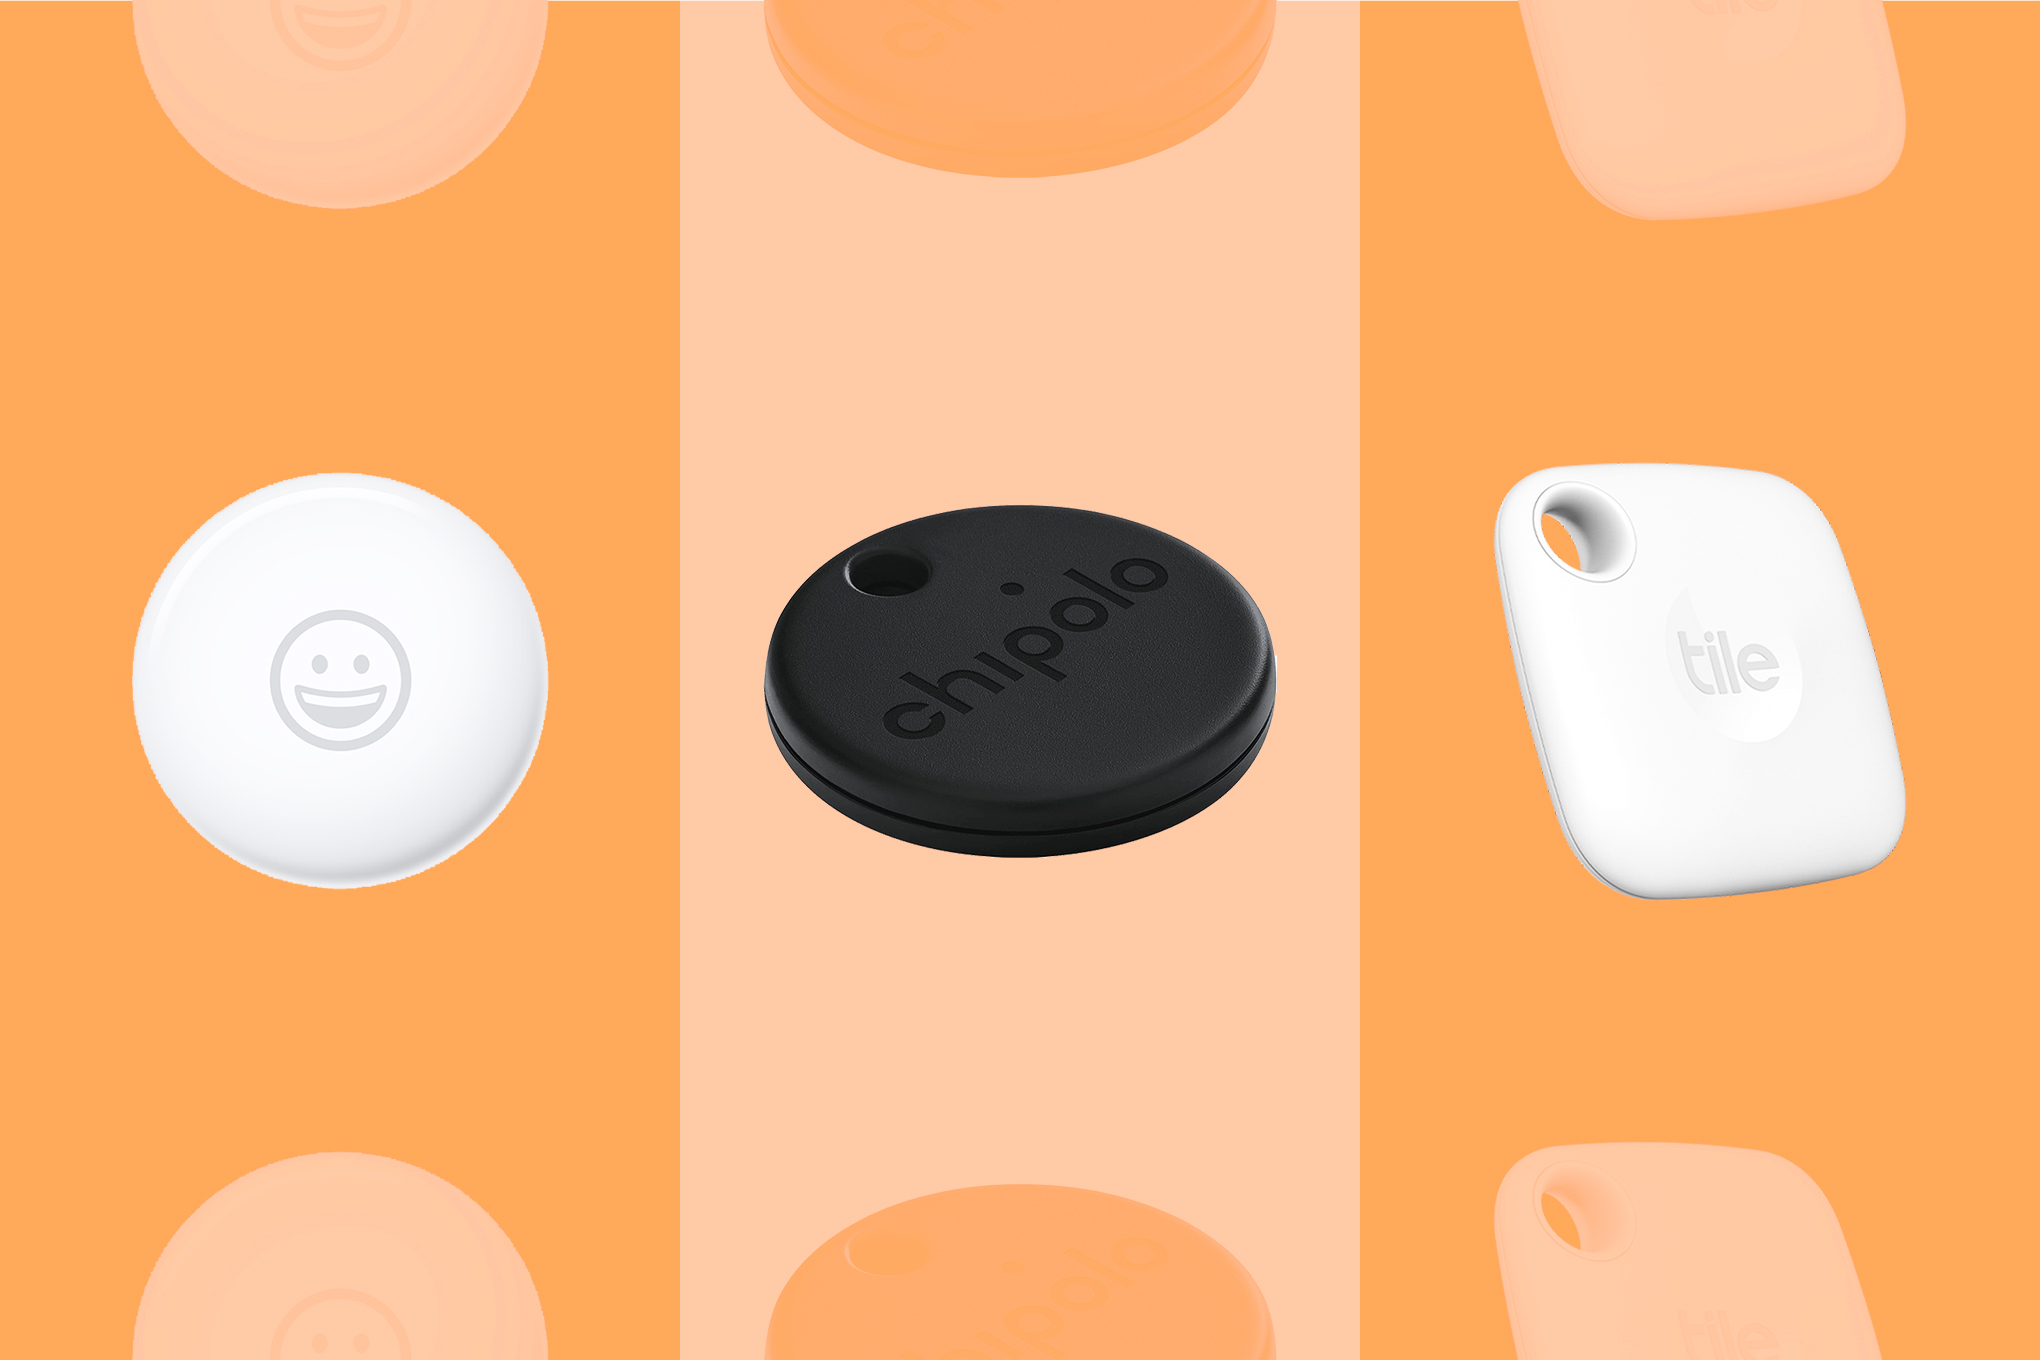 A graphic showing three popular Bluetooth trackers, including the Apple AirTag, the Tile Mate, and the Chipolo One Spot.